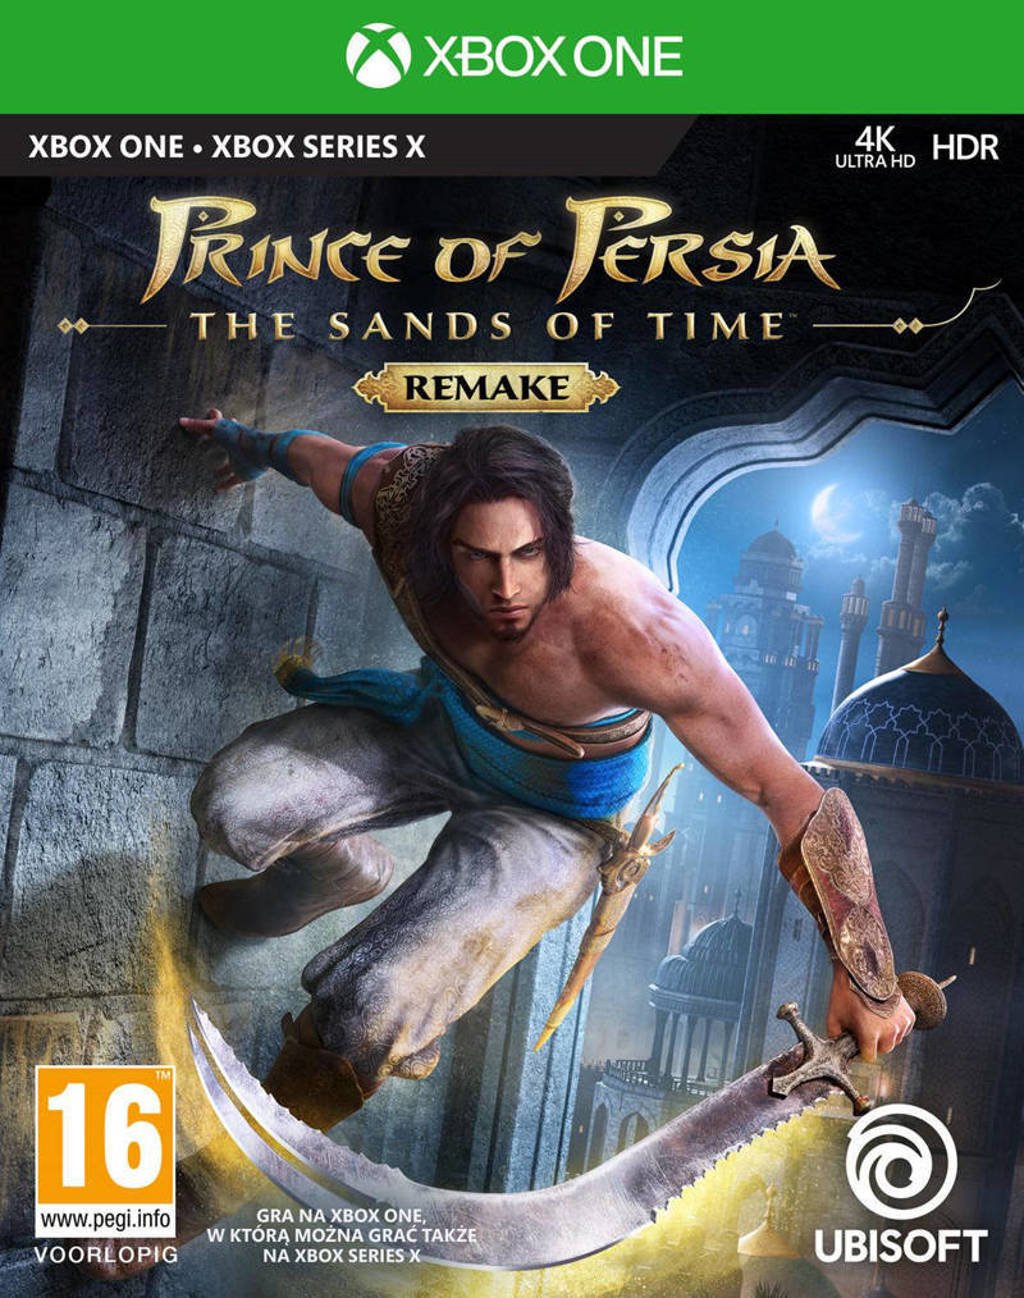 Prince of Persia - The sands of time (Remake) (Xbox One)